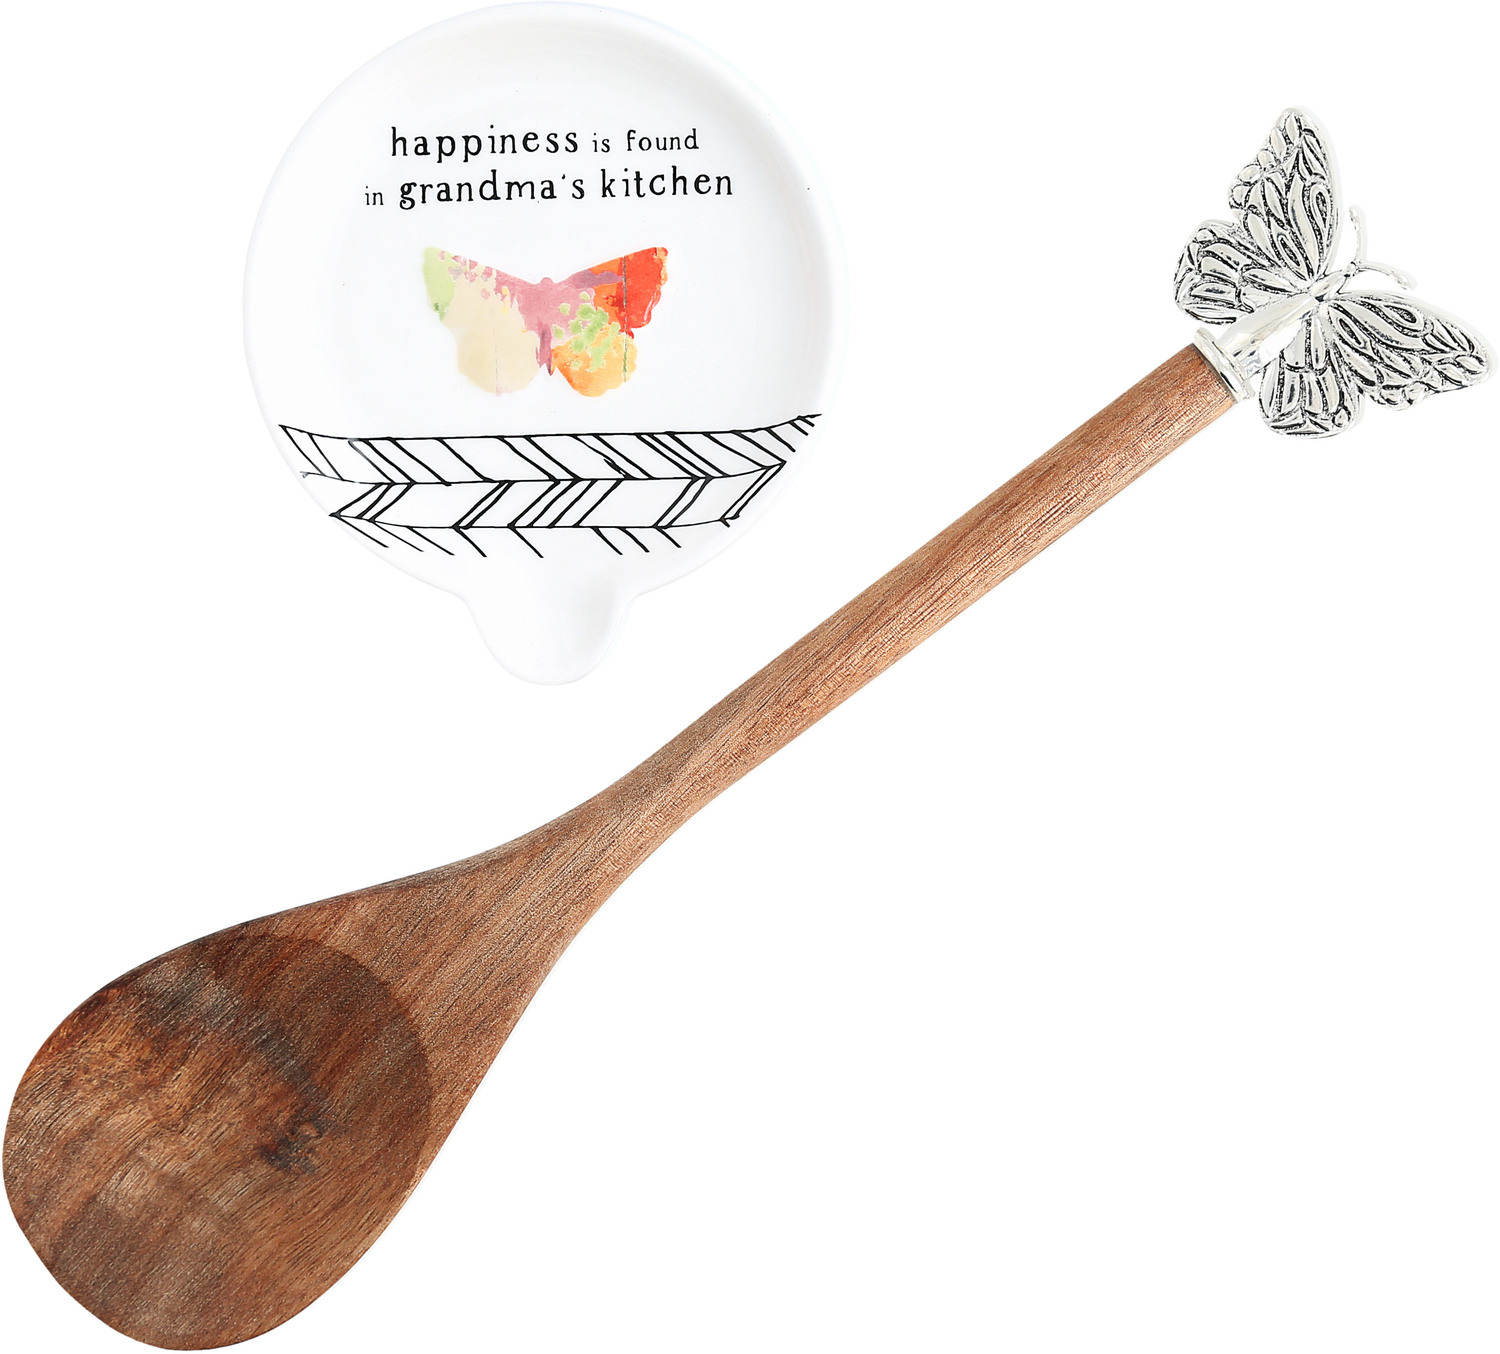 Grandma by Celebrating You - Grandma - 4" Spoon Rest with Decorative Bamboo Spoon